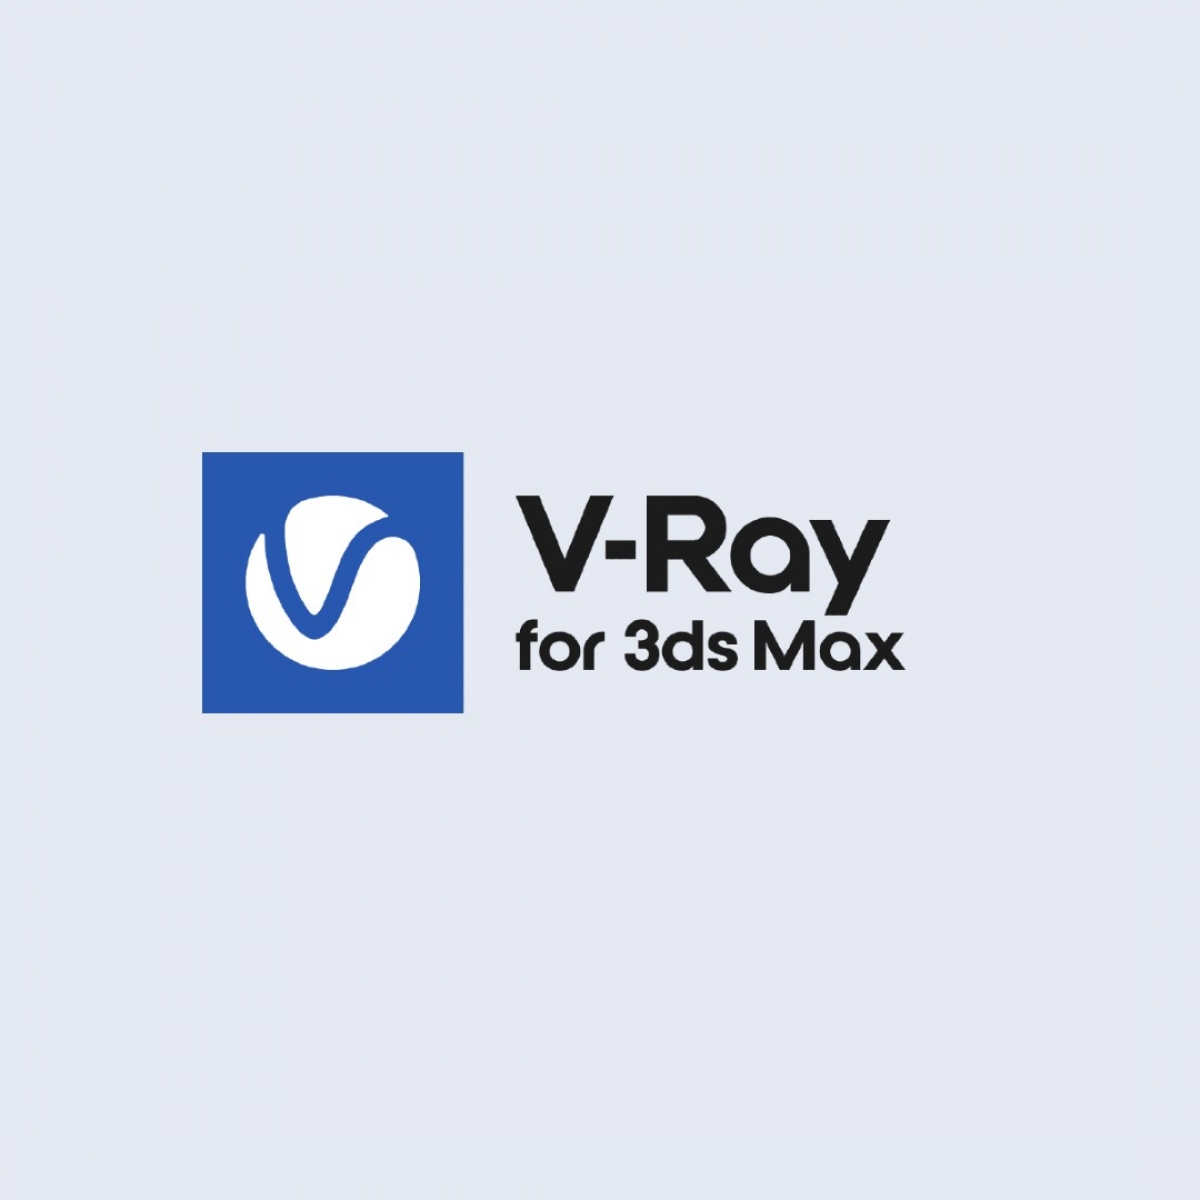 V-Ray 5 for 3ds Max